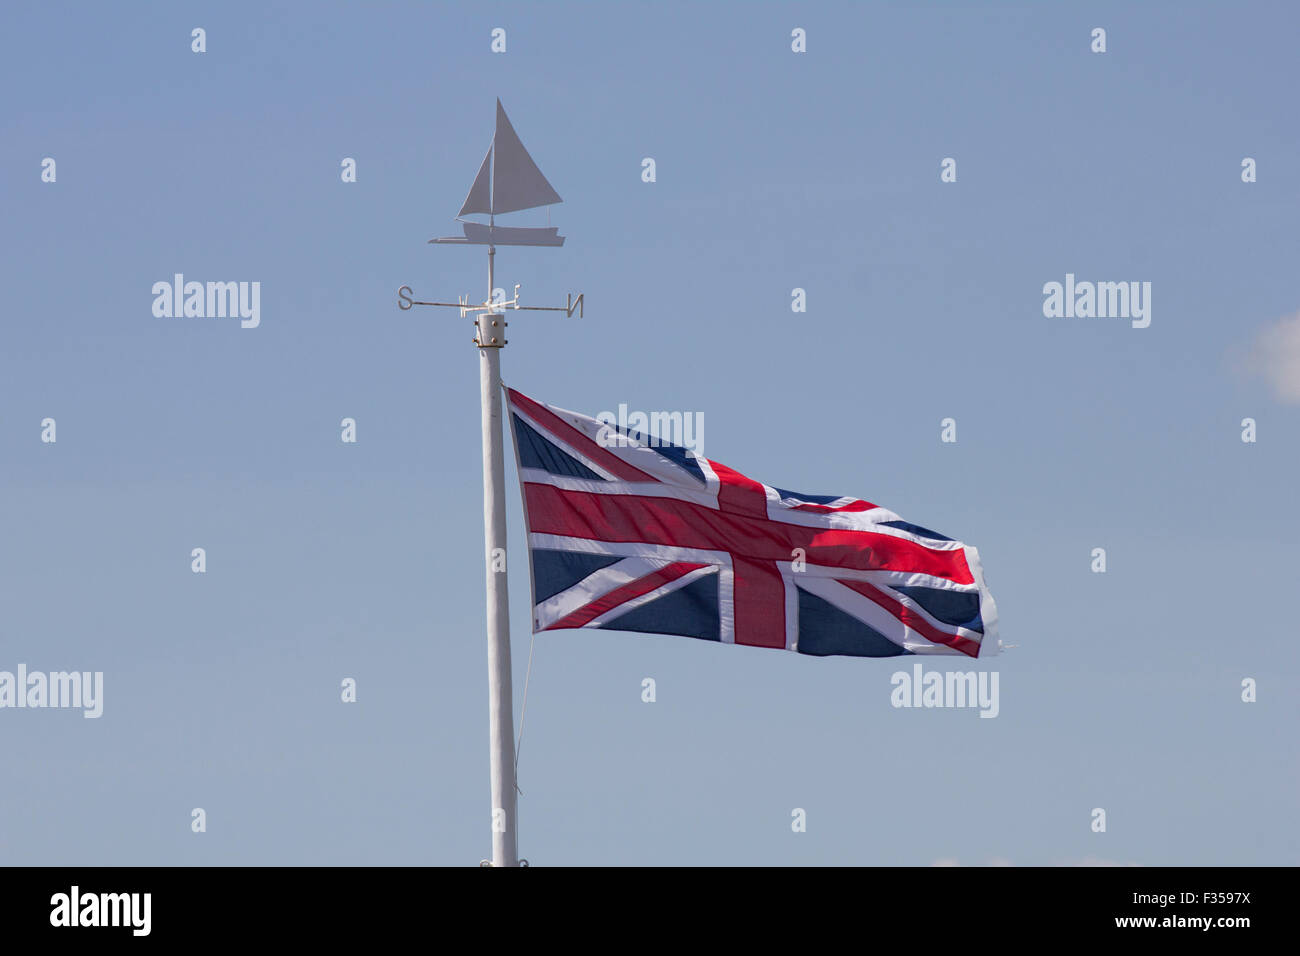 Union Jack or Union flag. The national flag of the United Kingdom of Great Britain and Northern Ireland Stock Photo